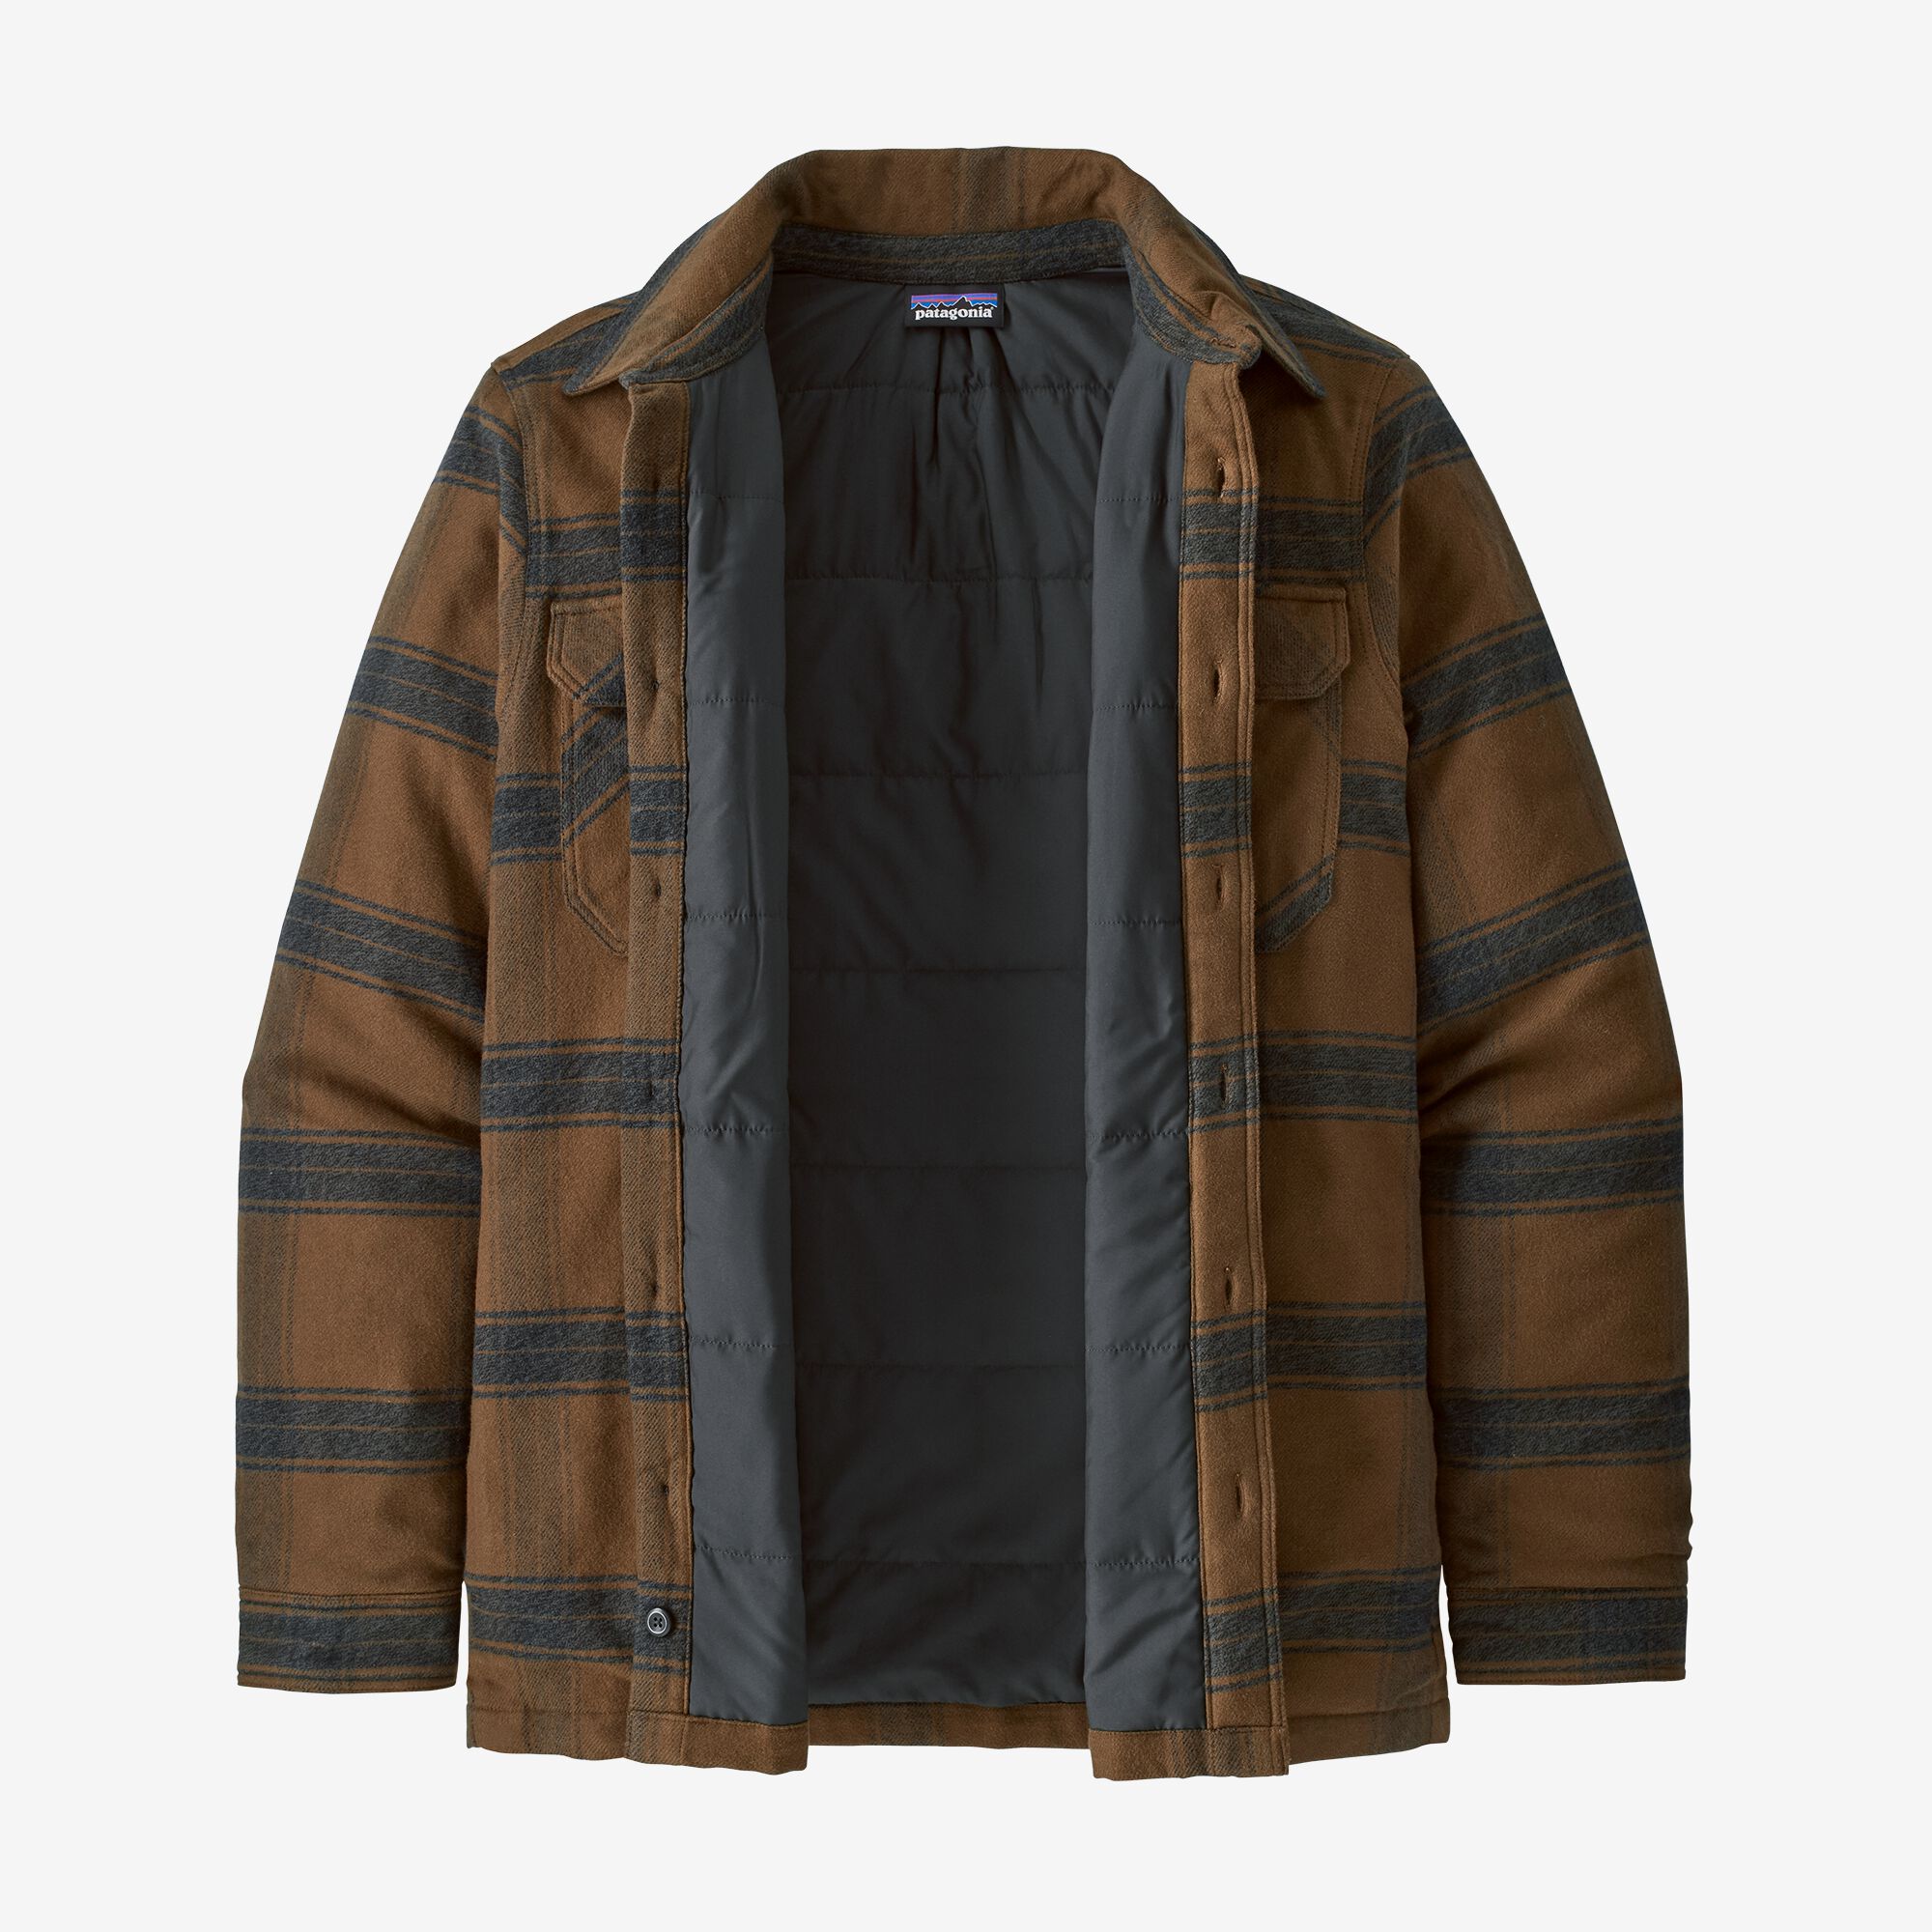 Patagonia Men's Insulated Fjord Flannel Jacket